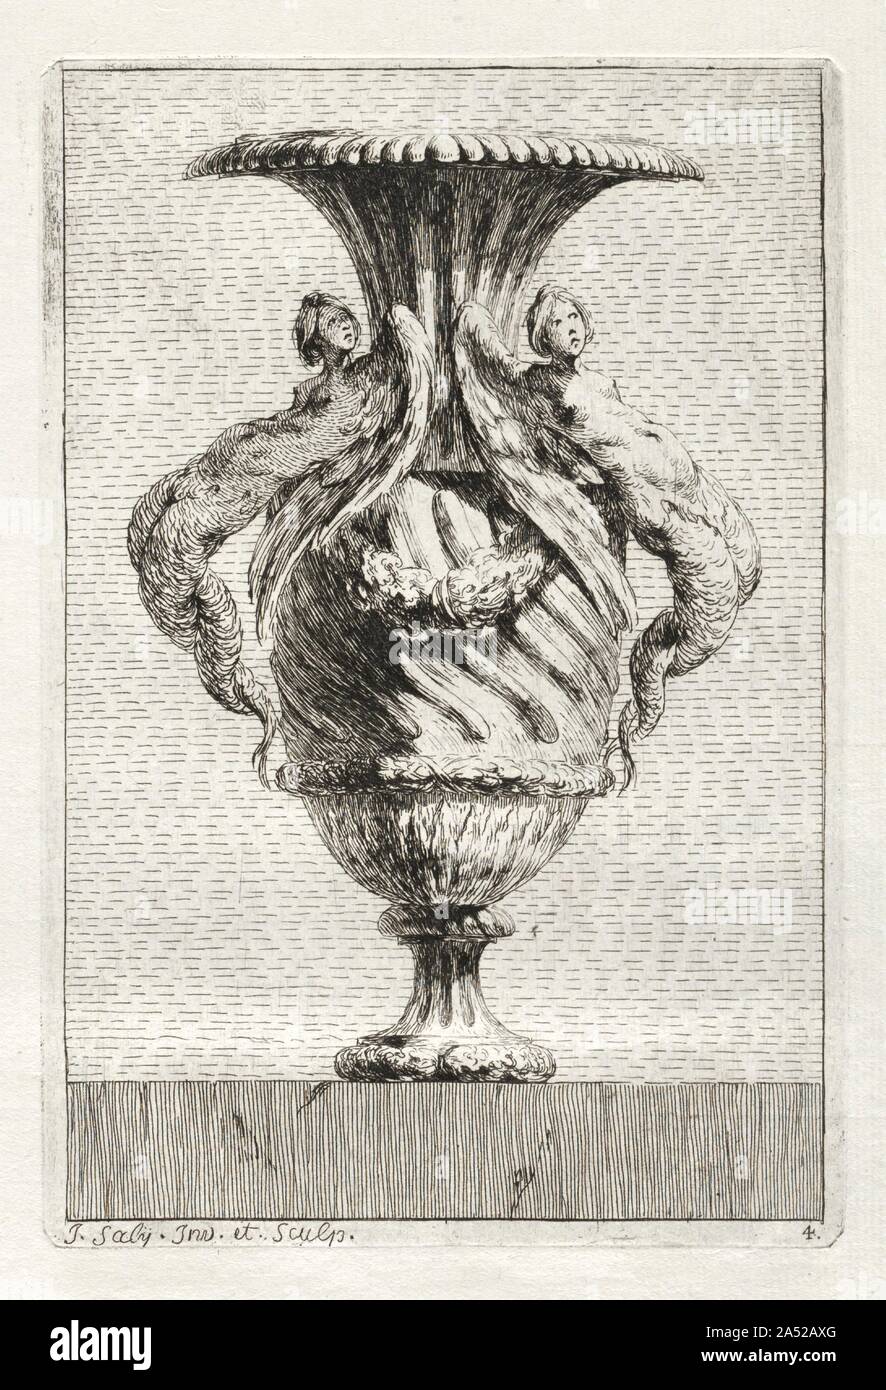 Suite of Vases: Plate 4, 1746. Designing ornamental vases or urns was particularly popular during the mid-18th century since the only limit to the possibilities was the imagination of the artist. Saly, a sculptor by training, was a student at the French Academy in Rome from 1740 to 1746, at which time he published a set of 30 etchings. Saly began with basic antique vase forms but deviated from classical ornament to use a rich variety of fantastic creatures for embellishment. Stock Photo